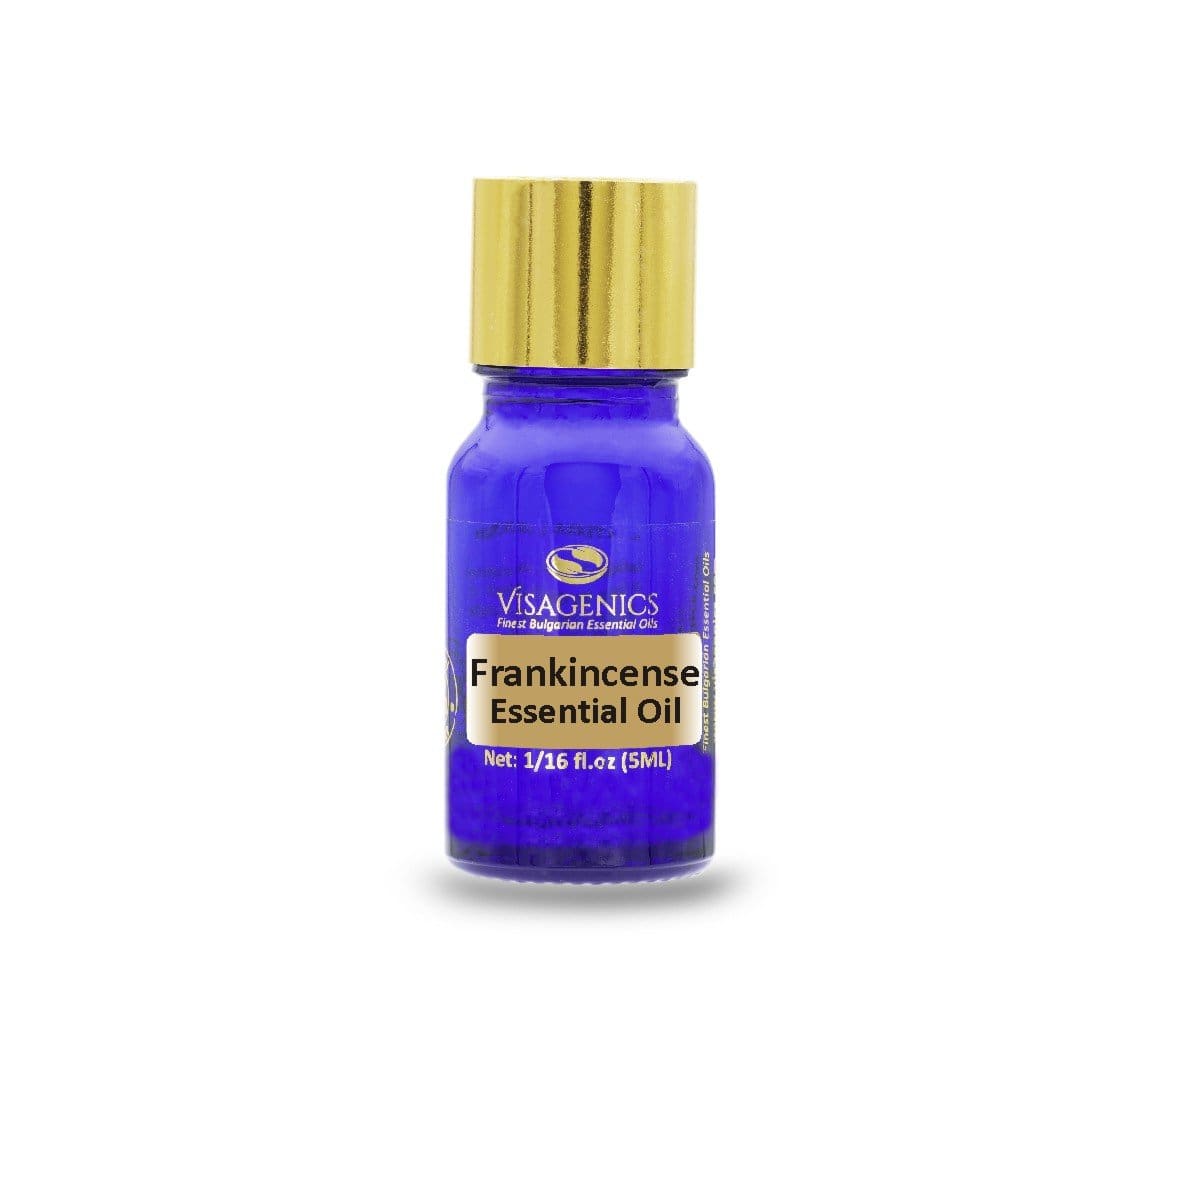 Frankincense and Myrrh Essential Oil Combo Pack 100% Pure, Best Therapeutic Grade Essential Oil - 2/10ml